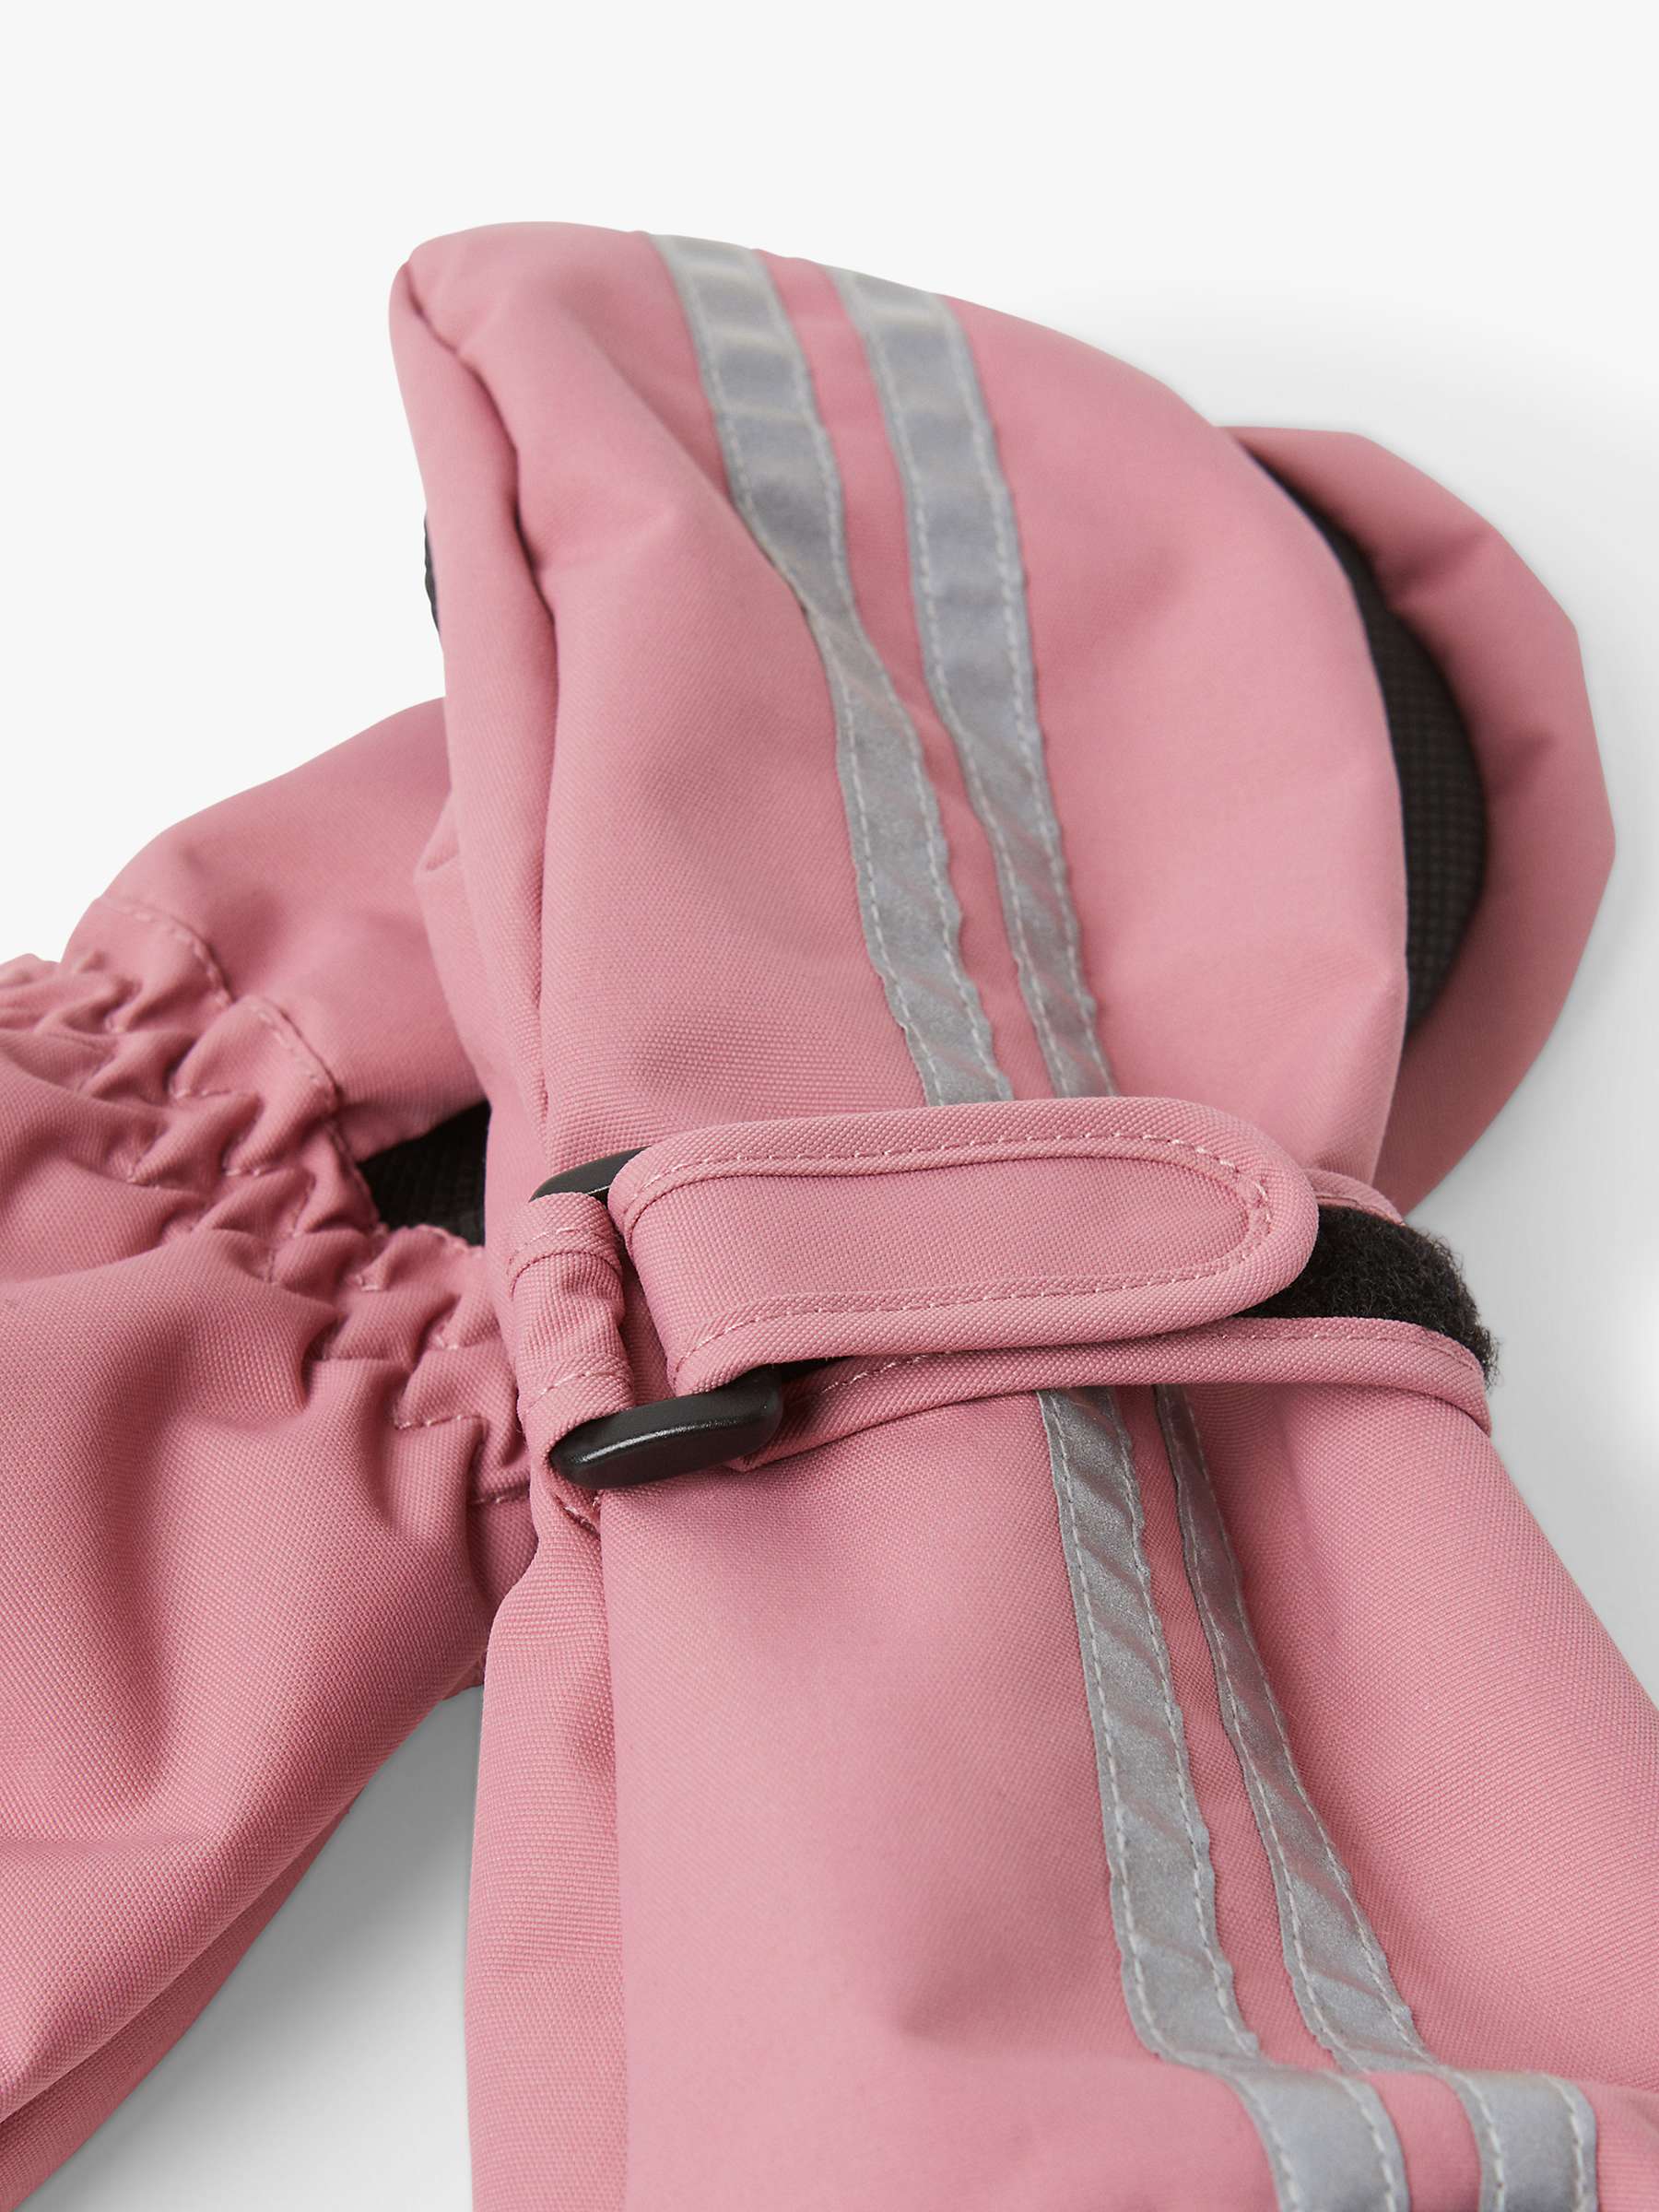 Buy Polarn O. Pyret Kids' Windproof & Waterproof Shell Mittens, Pink Online at johnlewis.com